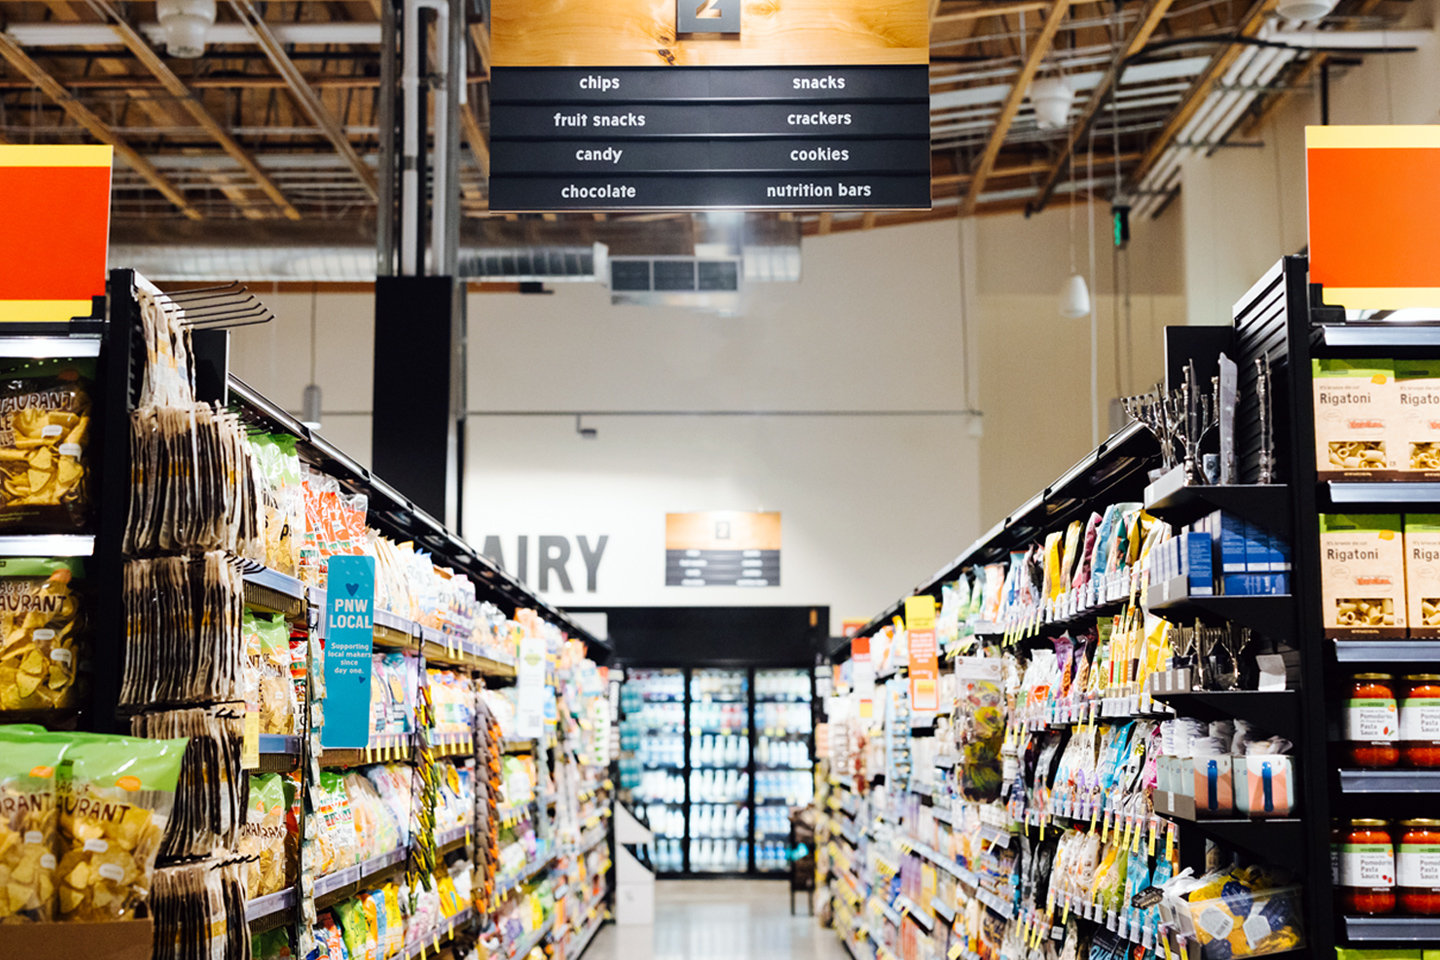 a view down a grocery aisle at New Seasons Market showing a variety of packaged grocery items.